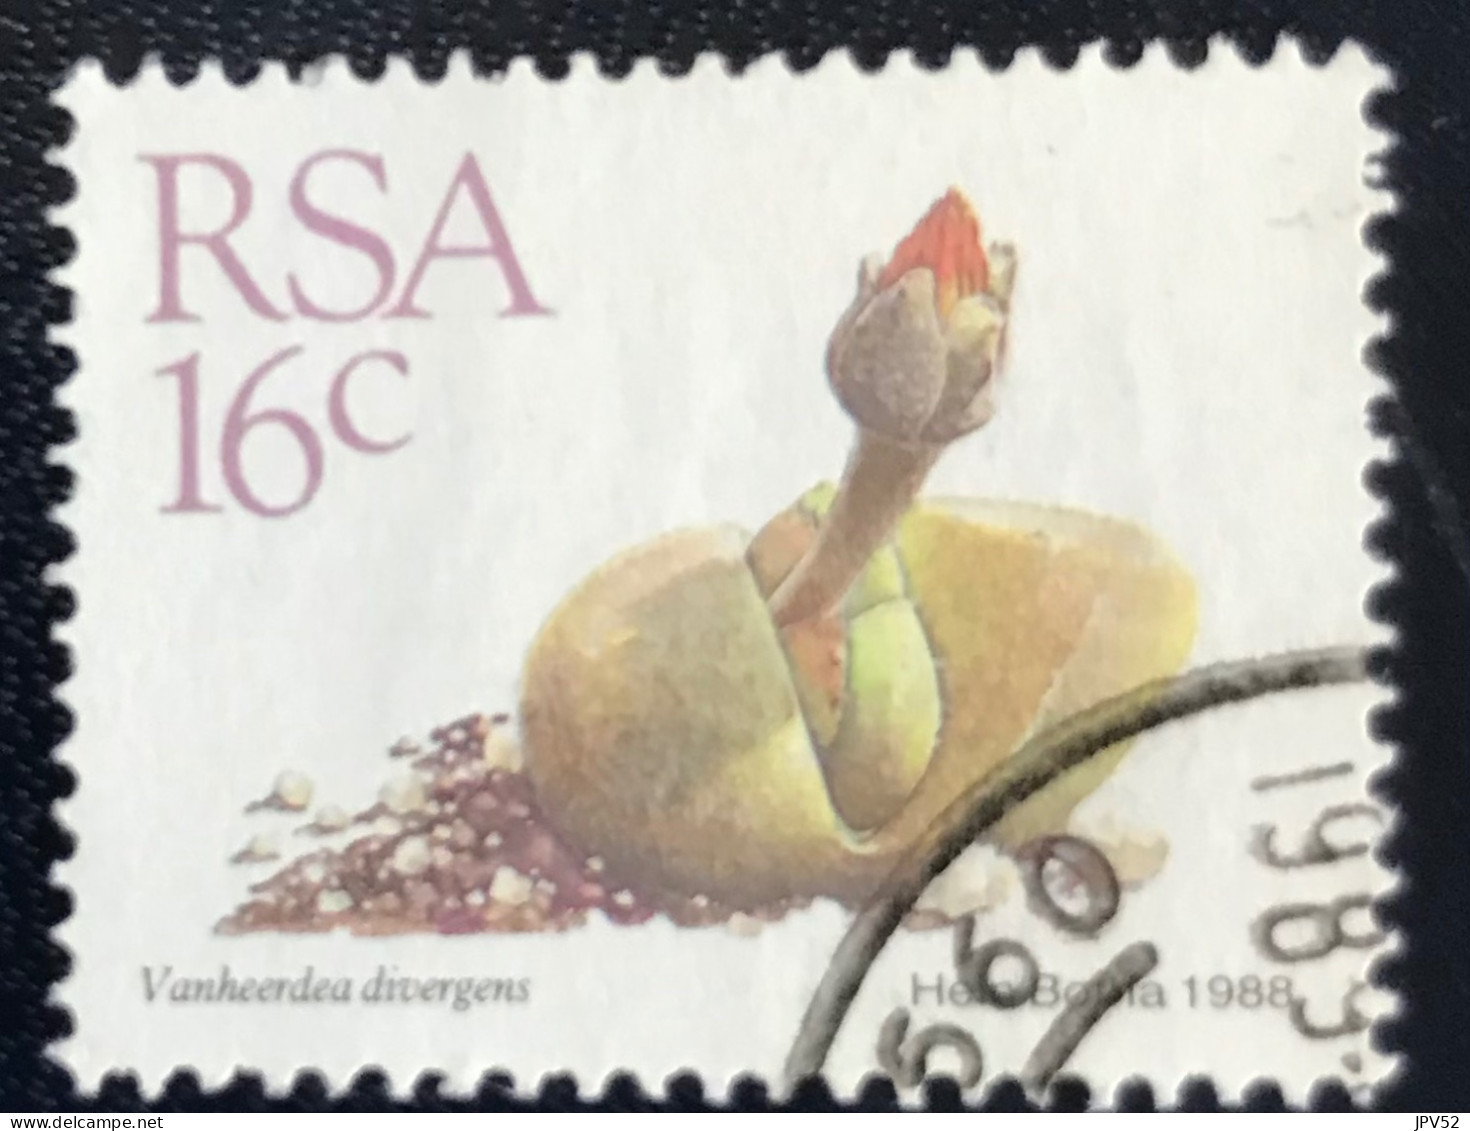 RSA - South Africa - Suid-Afrika  - C18/6 - 1988 - (°)used - Michel 748 - Vetplanten - Used Stamps